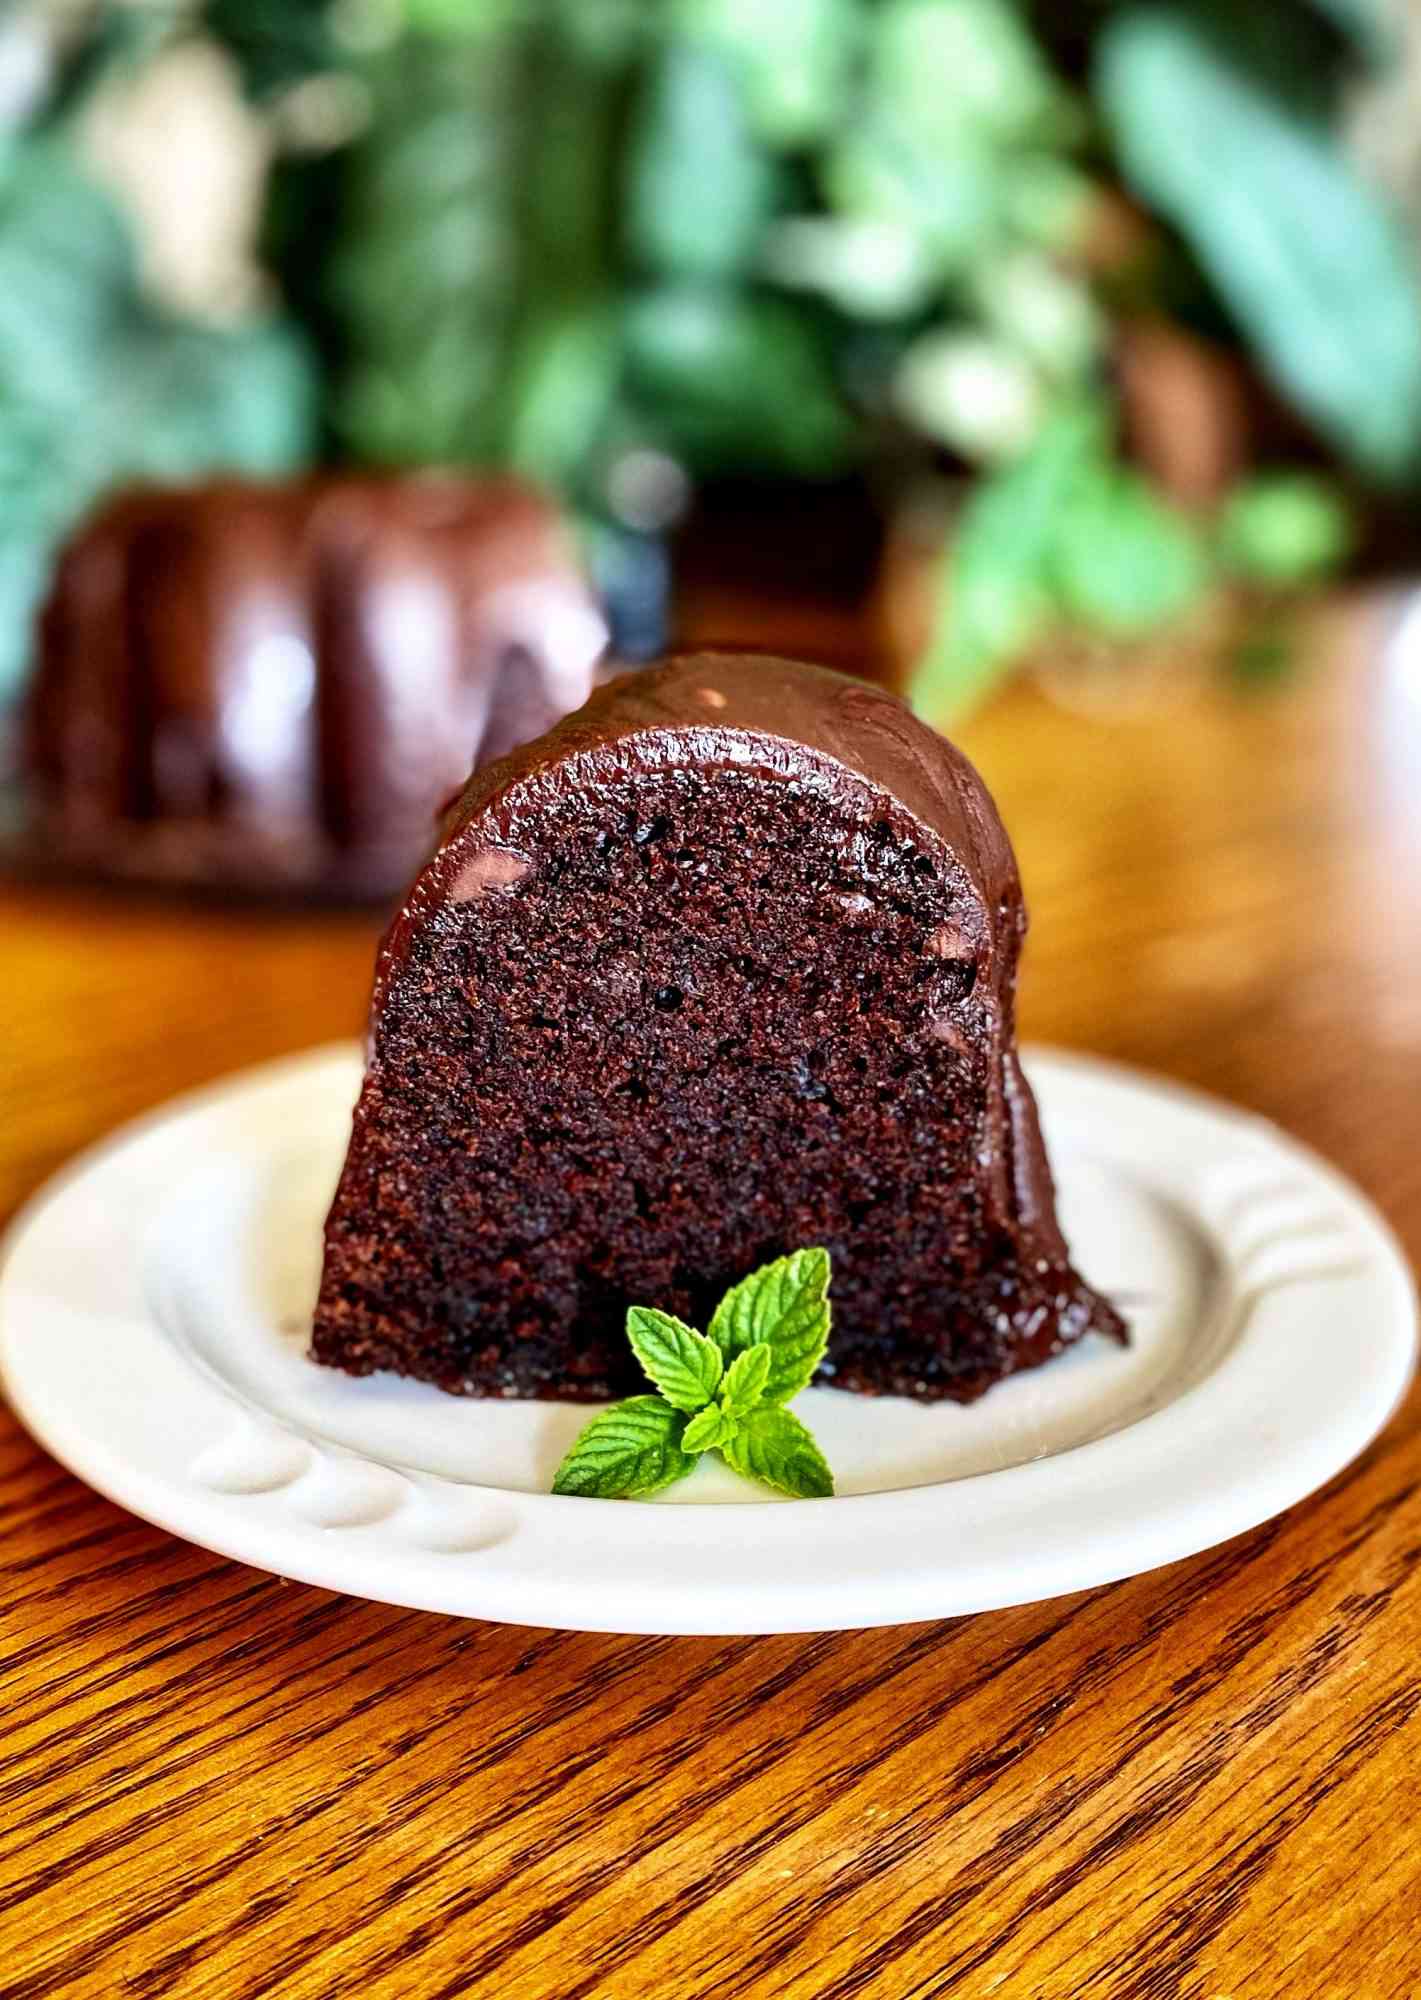 May 19: National Devil's Food Cake Day